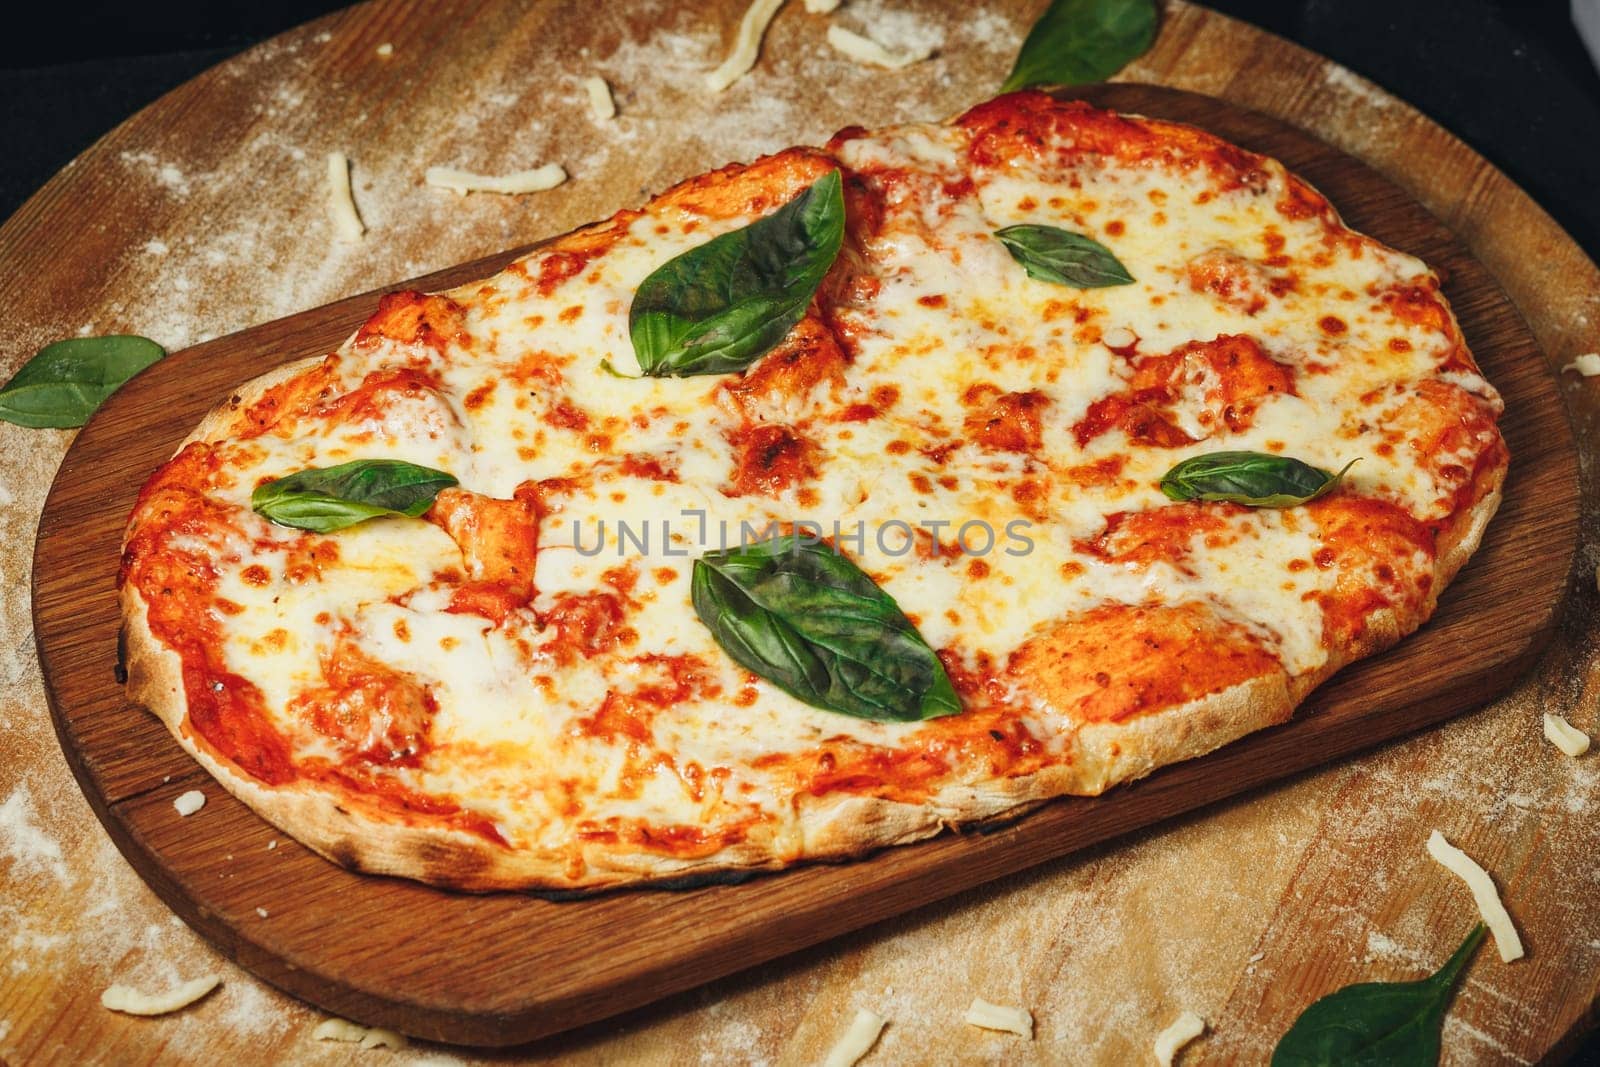 Handcrafted Heart-Shaped Margherita Pizza on Wooden Board, Garnished With Fresh Basil Leaves by Miron